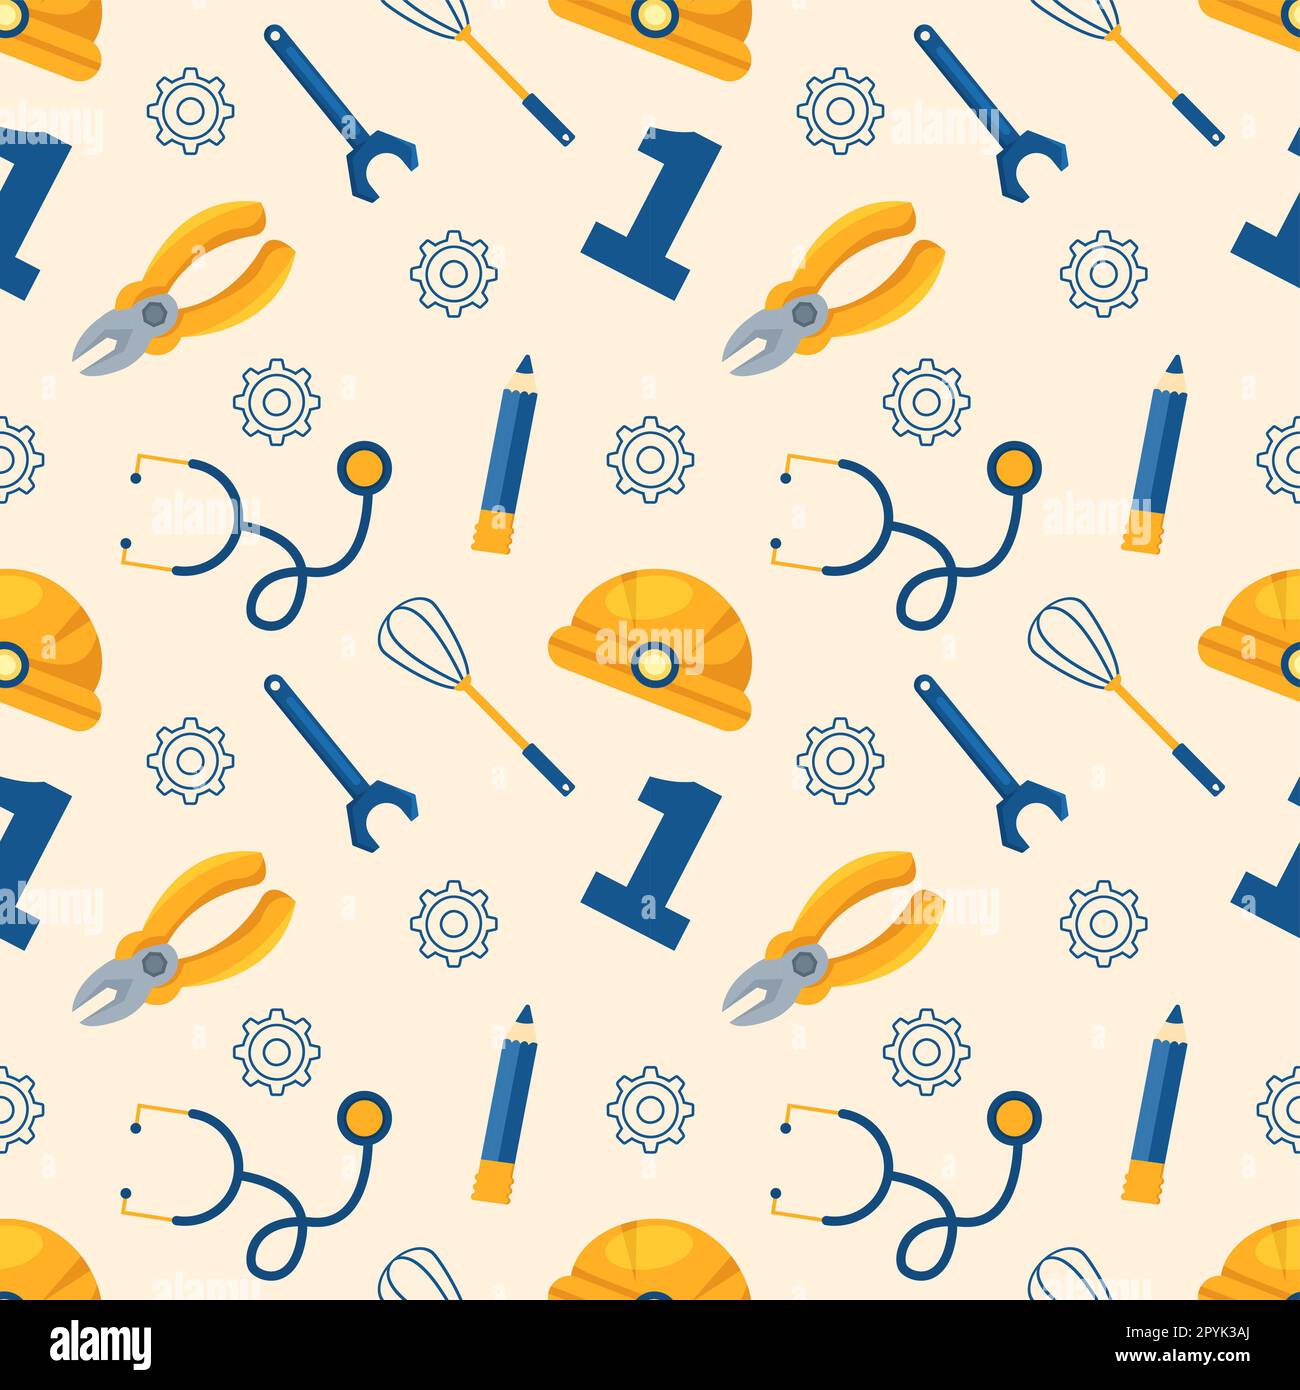 Happy Labor Day Seamless Pattern Design Illustration with Different Professions in Element Template Hand Drawn Stock Photo